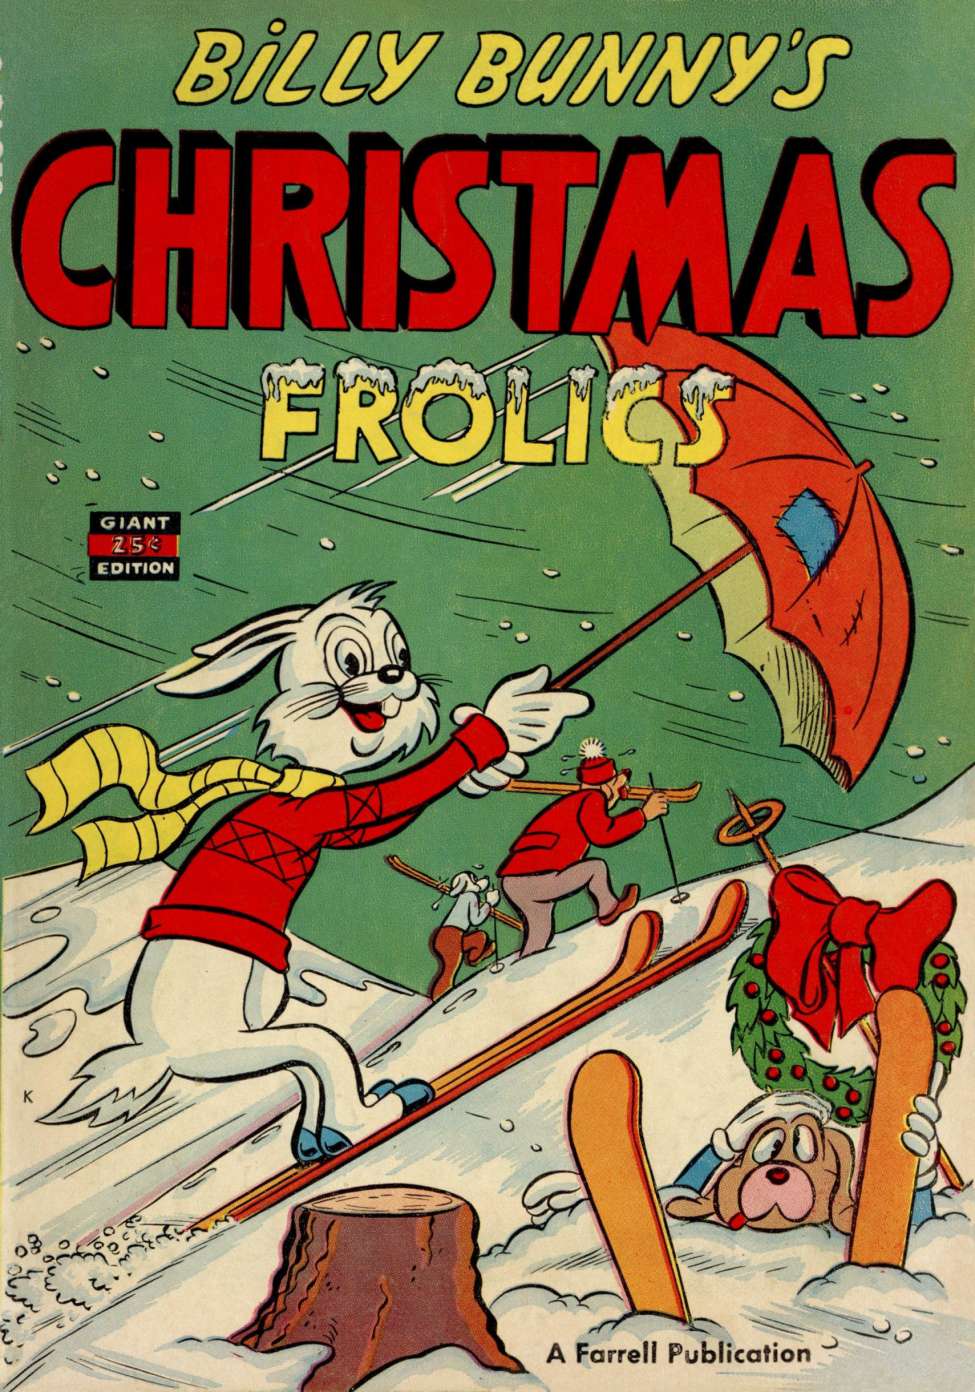 Book Cover For Billy Bunny's Christmas Frolics 1 - Version 2